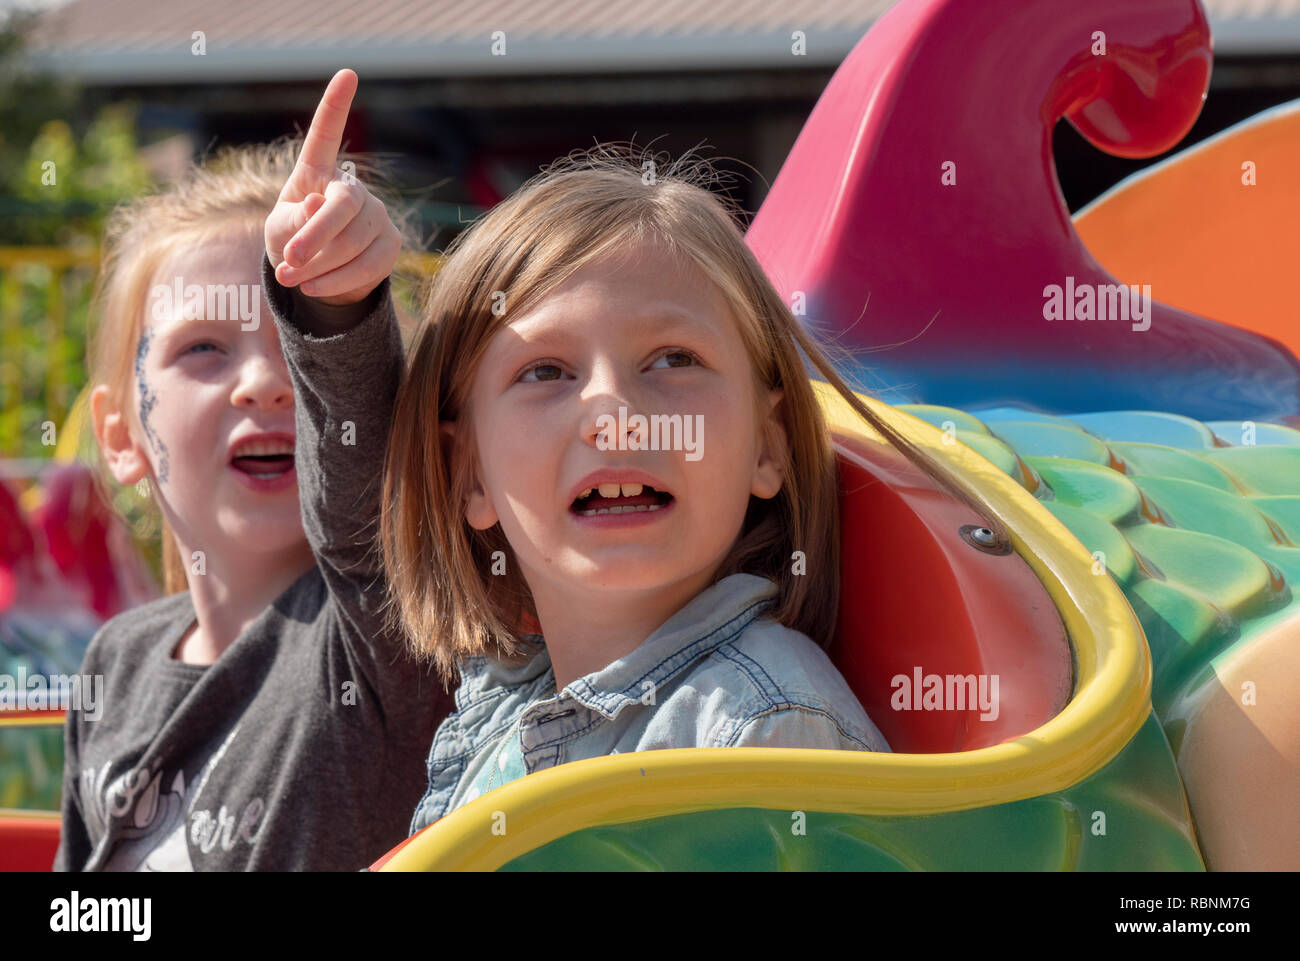 Two sisters 5years & 7years old enjoy the fun of a pleasure park. Stock Photo